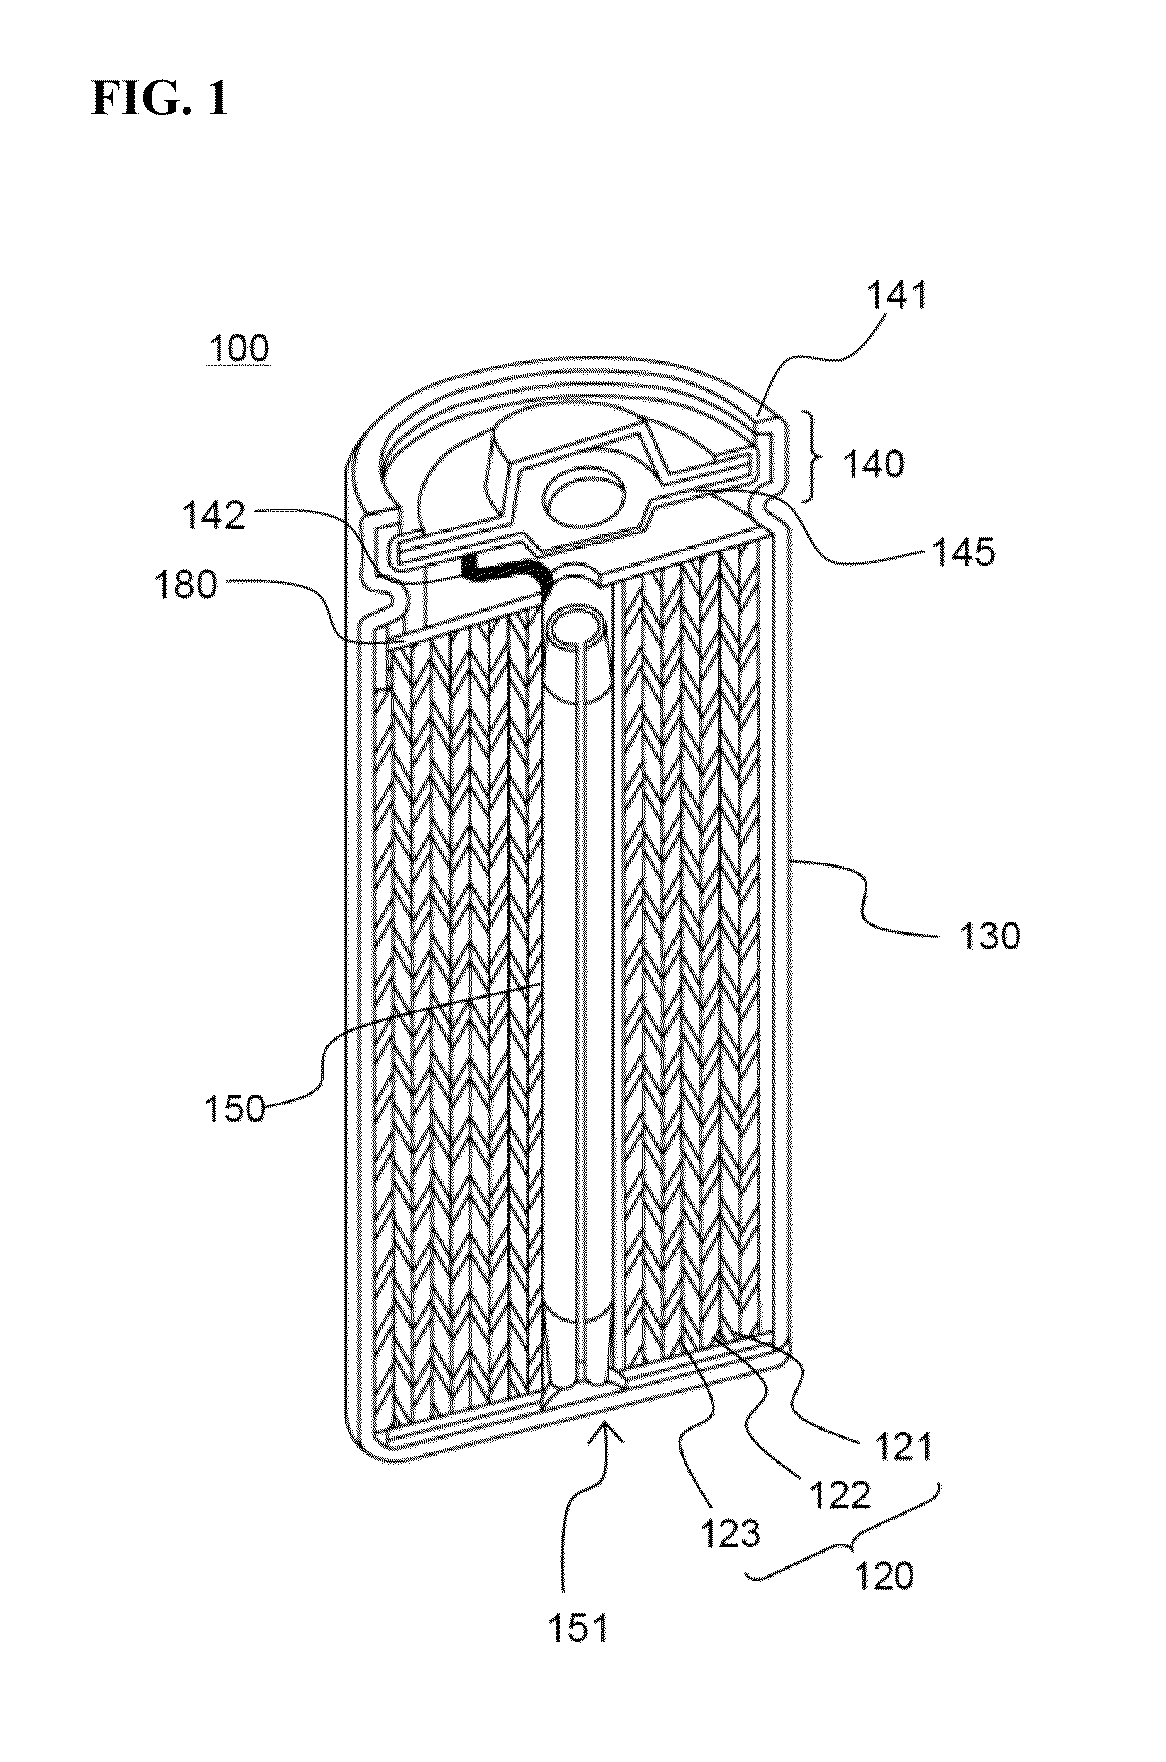 Secondary battery comprising insulator and reinforcing filler